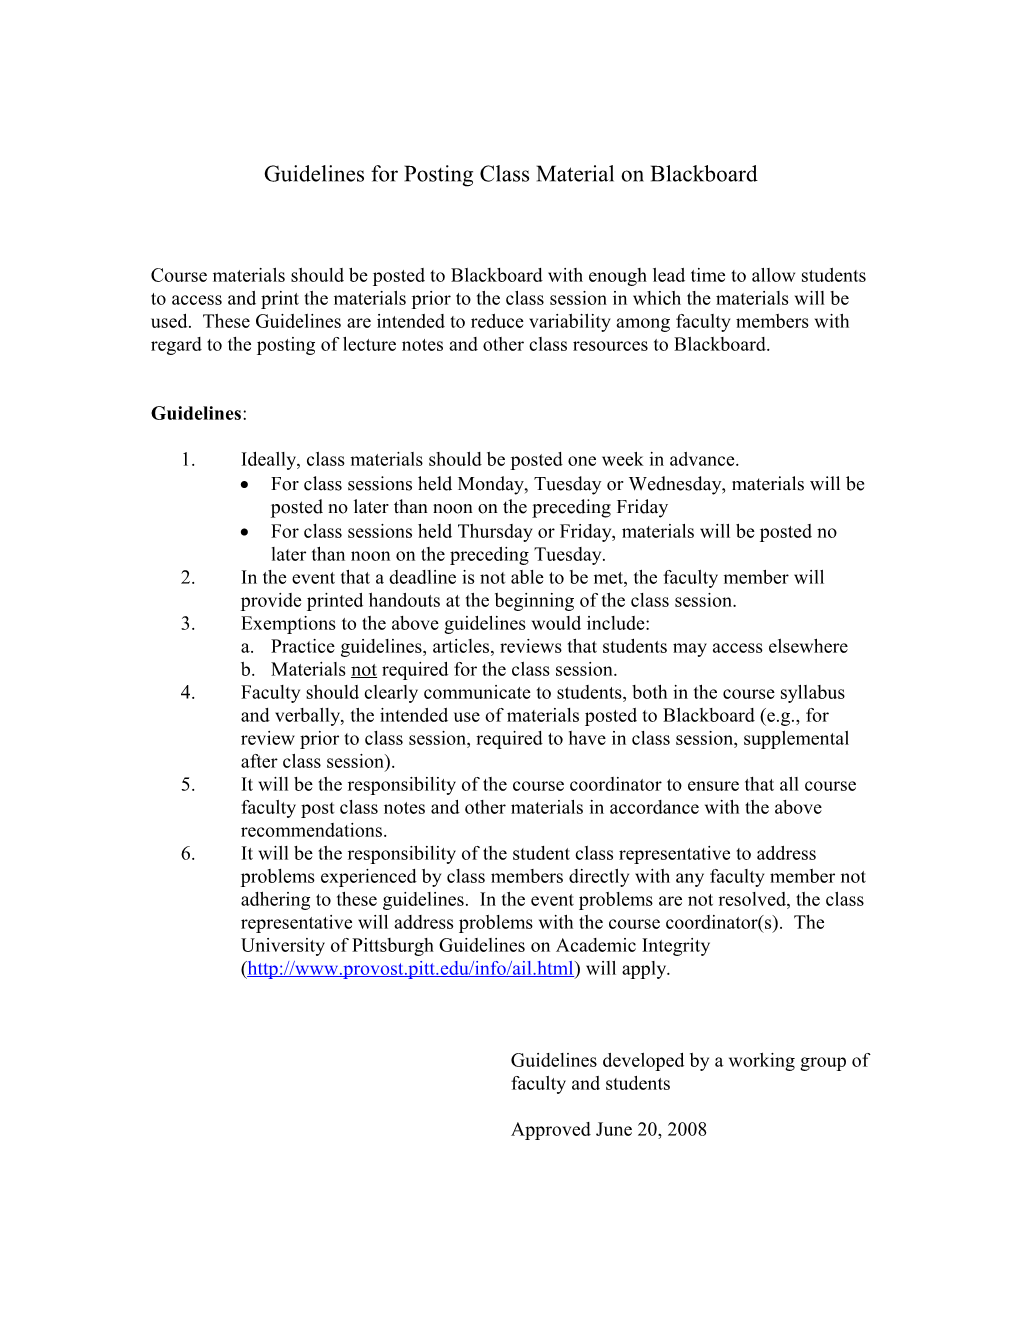 Guidelines for Posting Class Material on Blackboard